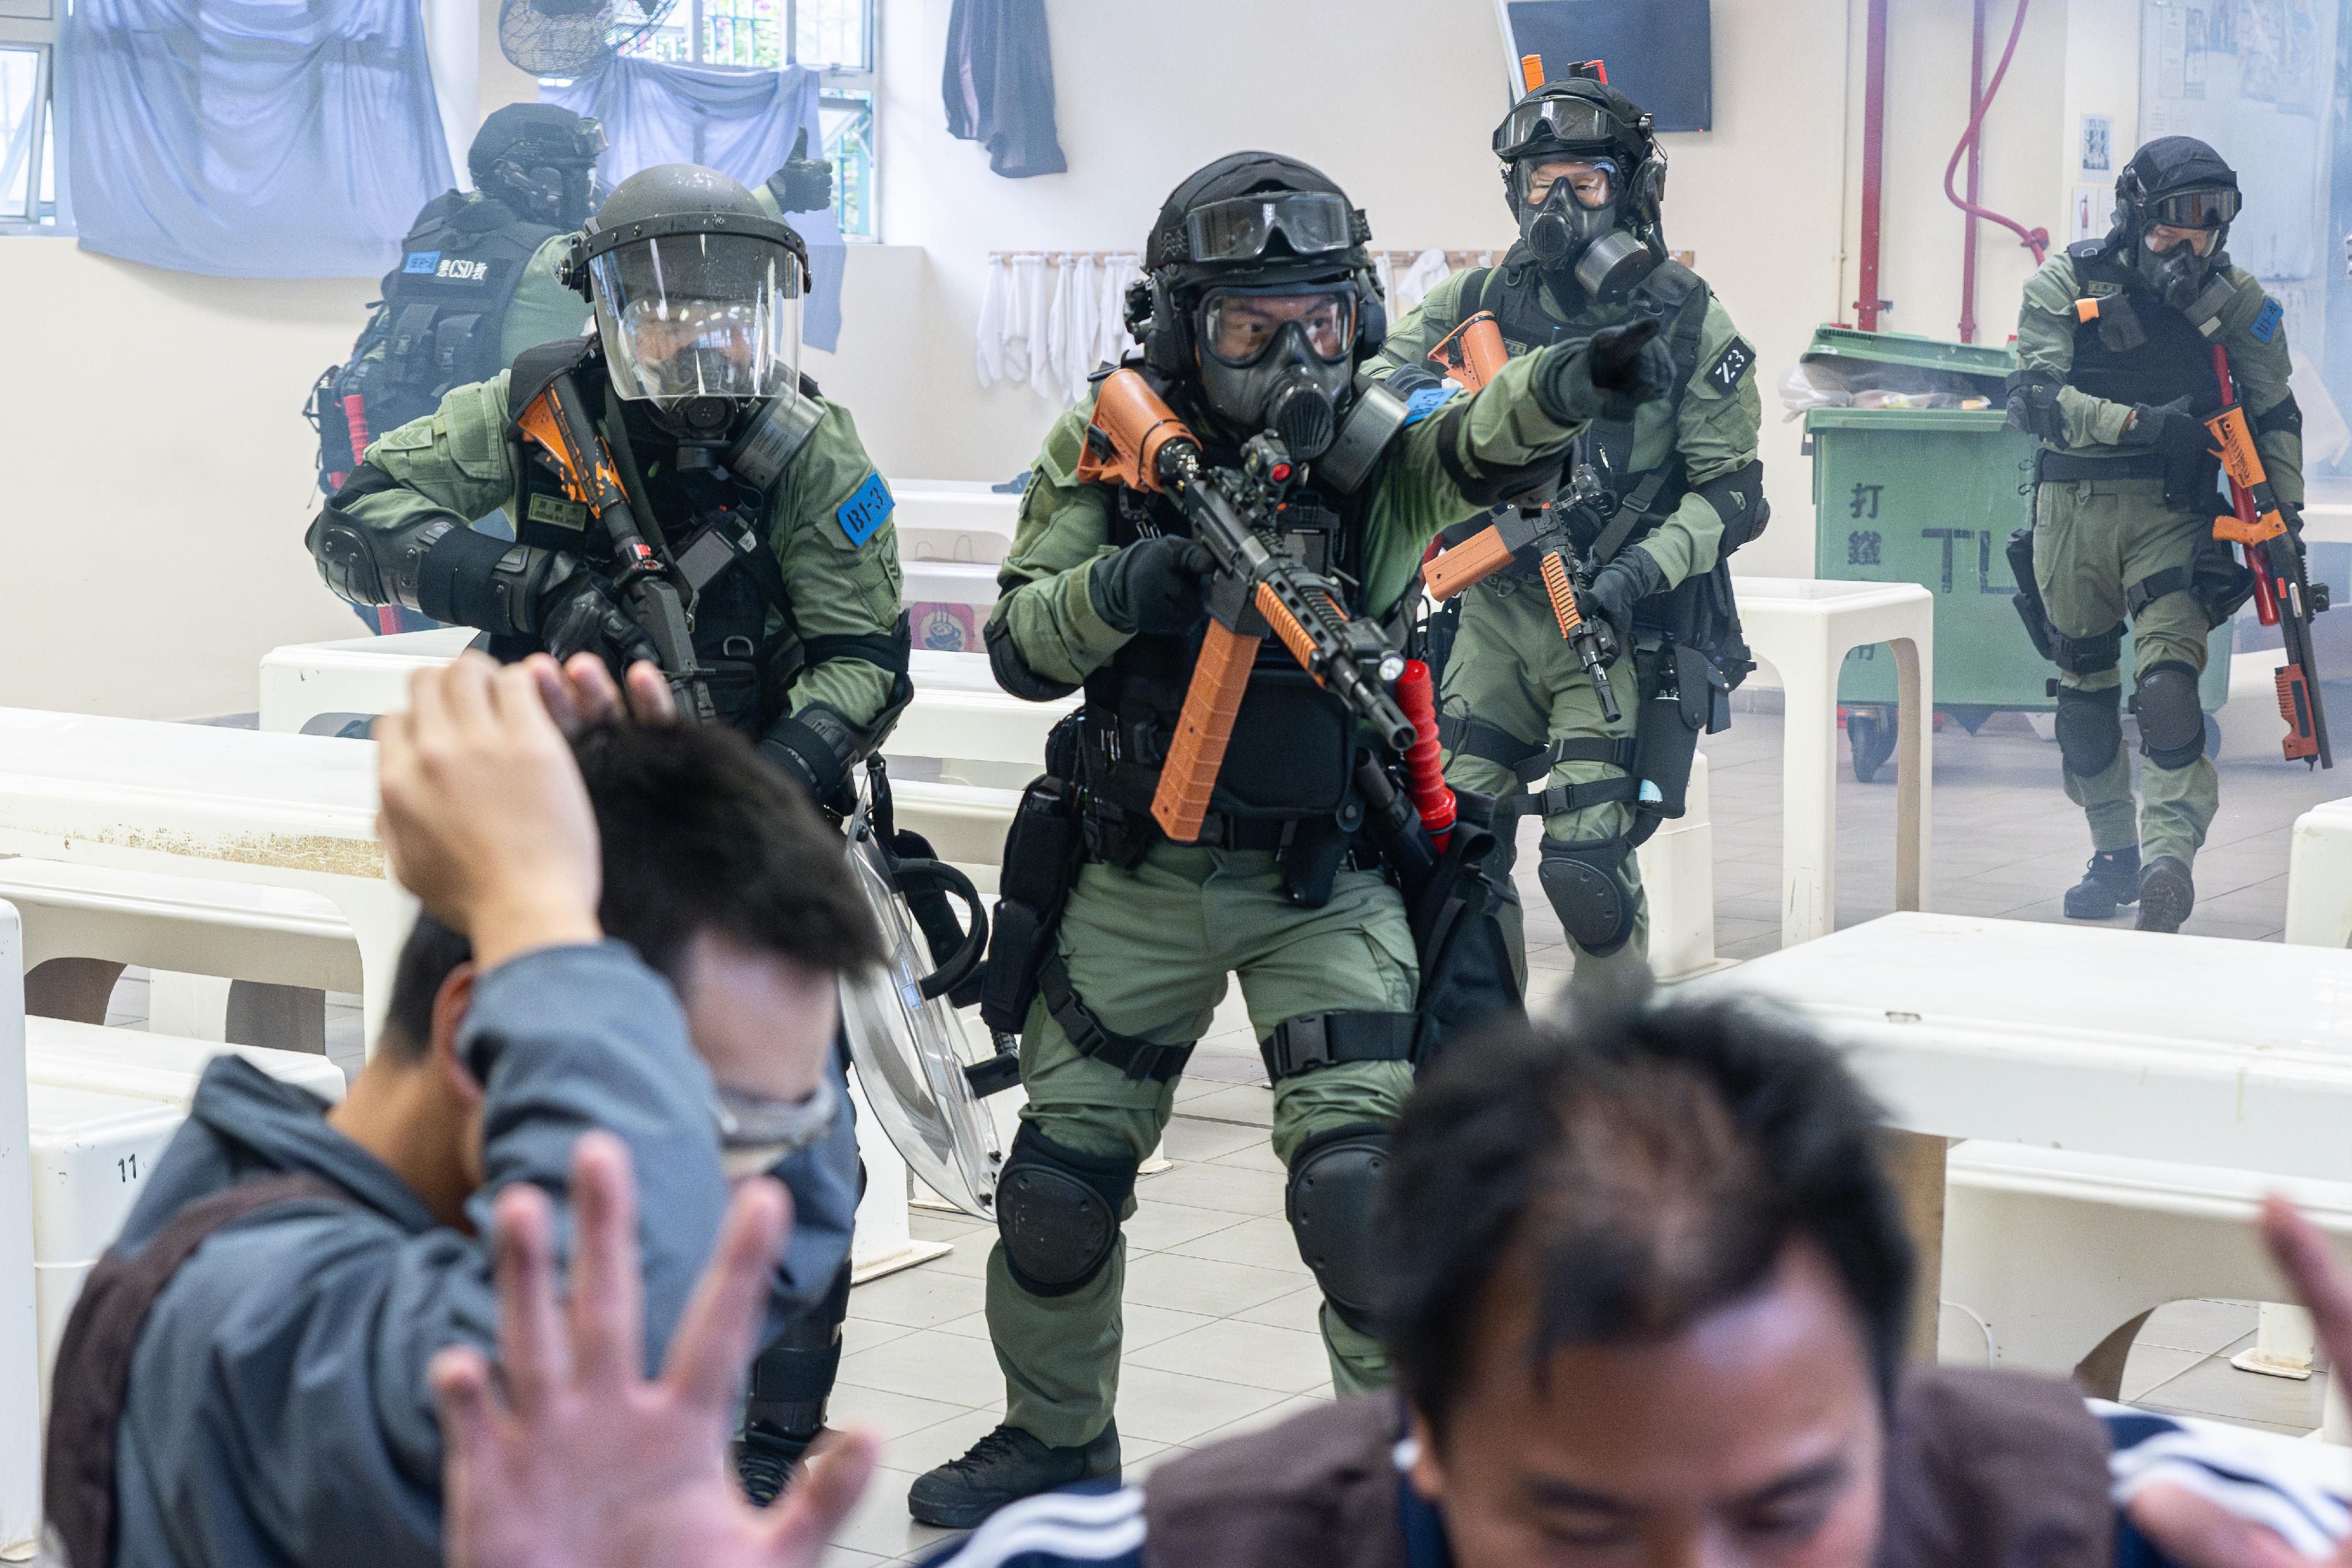 The Correctional Services Department (CSD) conducted an emergency exercise, code-named Concord XXII, today (December 6). The exercise simulated a series of incidents including mass indiscipline of persons in custody, a hostage-taking situation, members of the public obstructing CSD officers in execution of their duty, and the revelation of bio-chemical hazardous materials at Tai Lam Correctional Institution. Photo shows the Correctional Regional Response Team subduing persons in custody who have violated discipline regulations. 